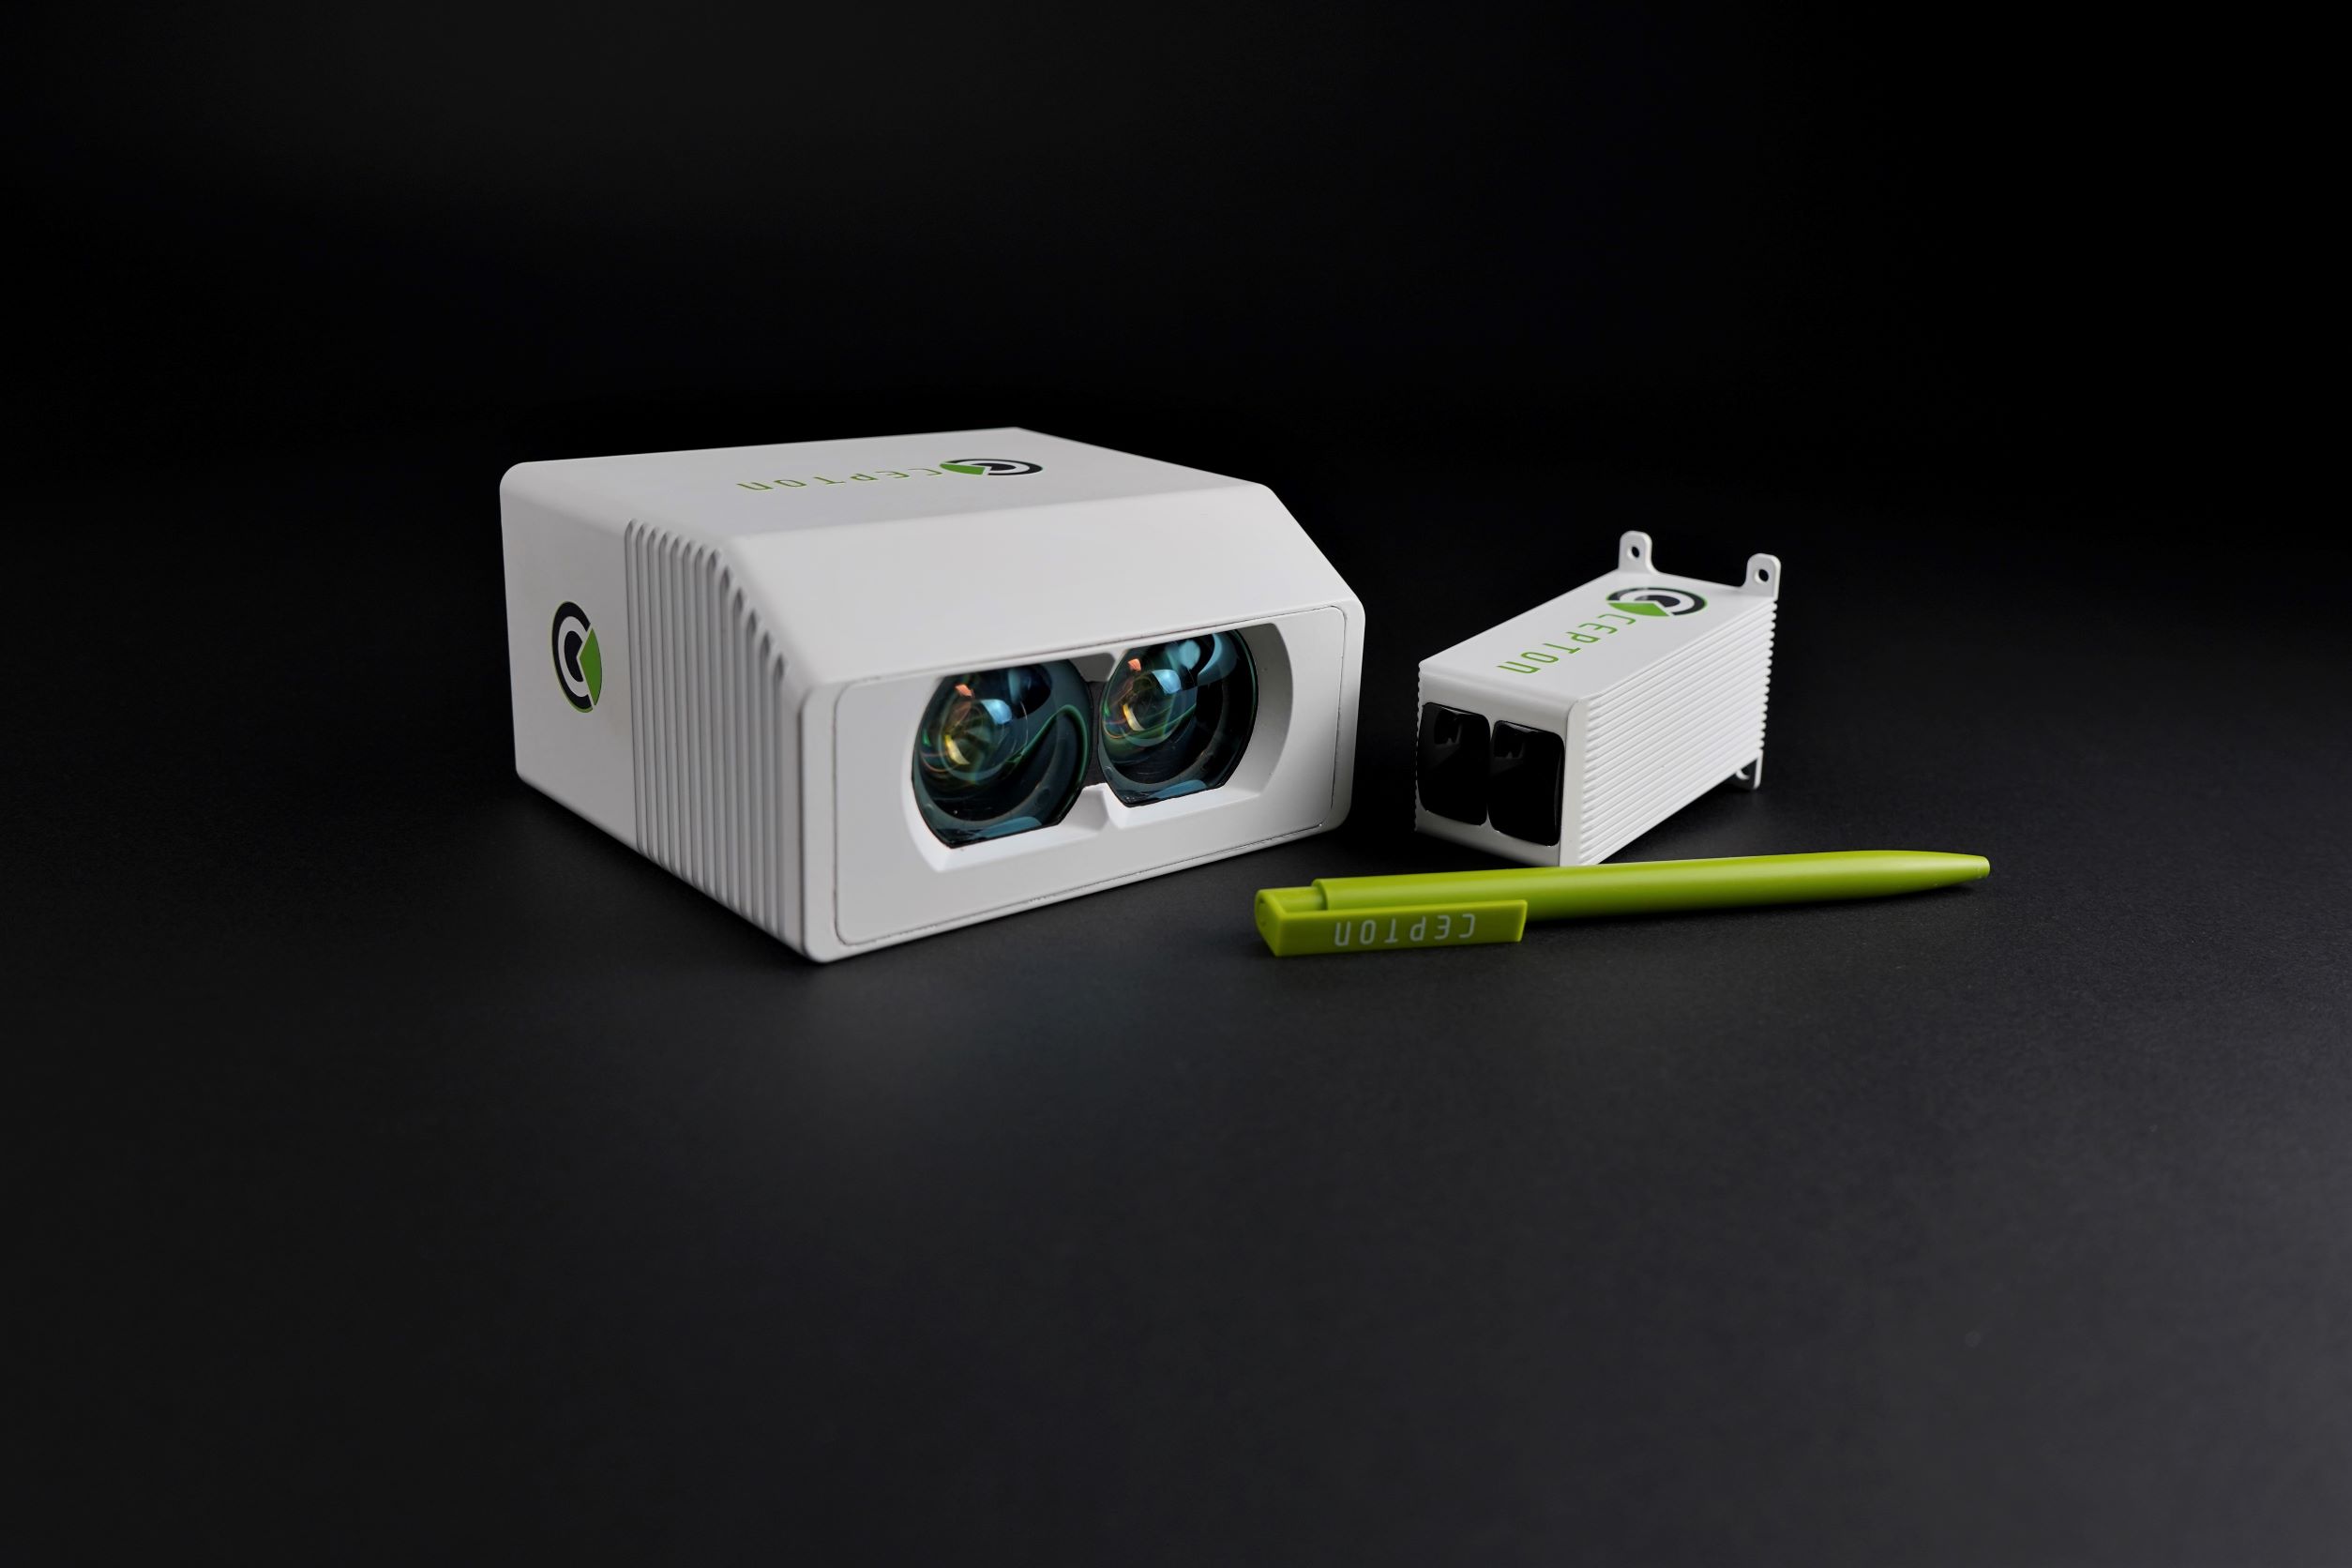 Cepton selects ams OSRAM’s 905 nm lasers to fulfill large-scale contract for LiDAR solutions in ADAS and Autonomous Vehicles